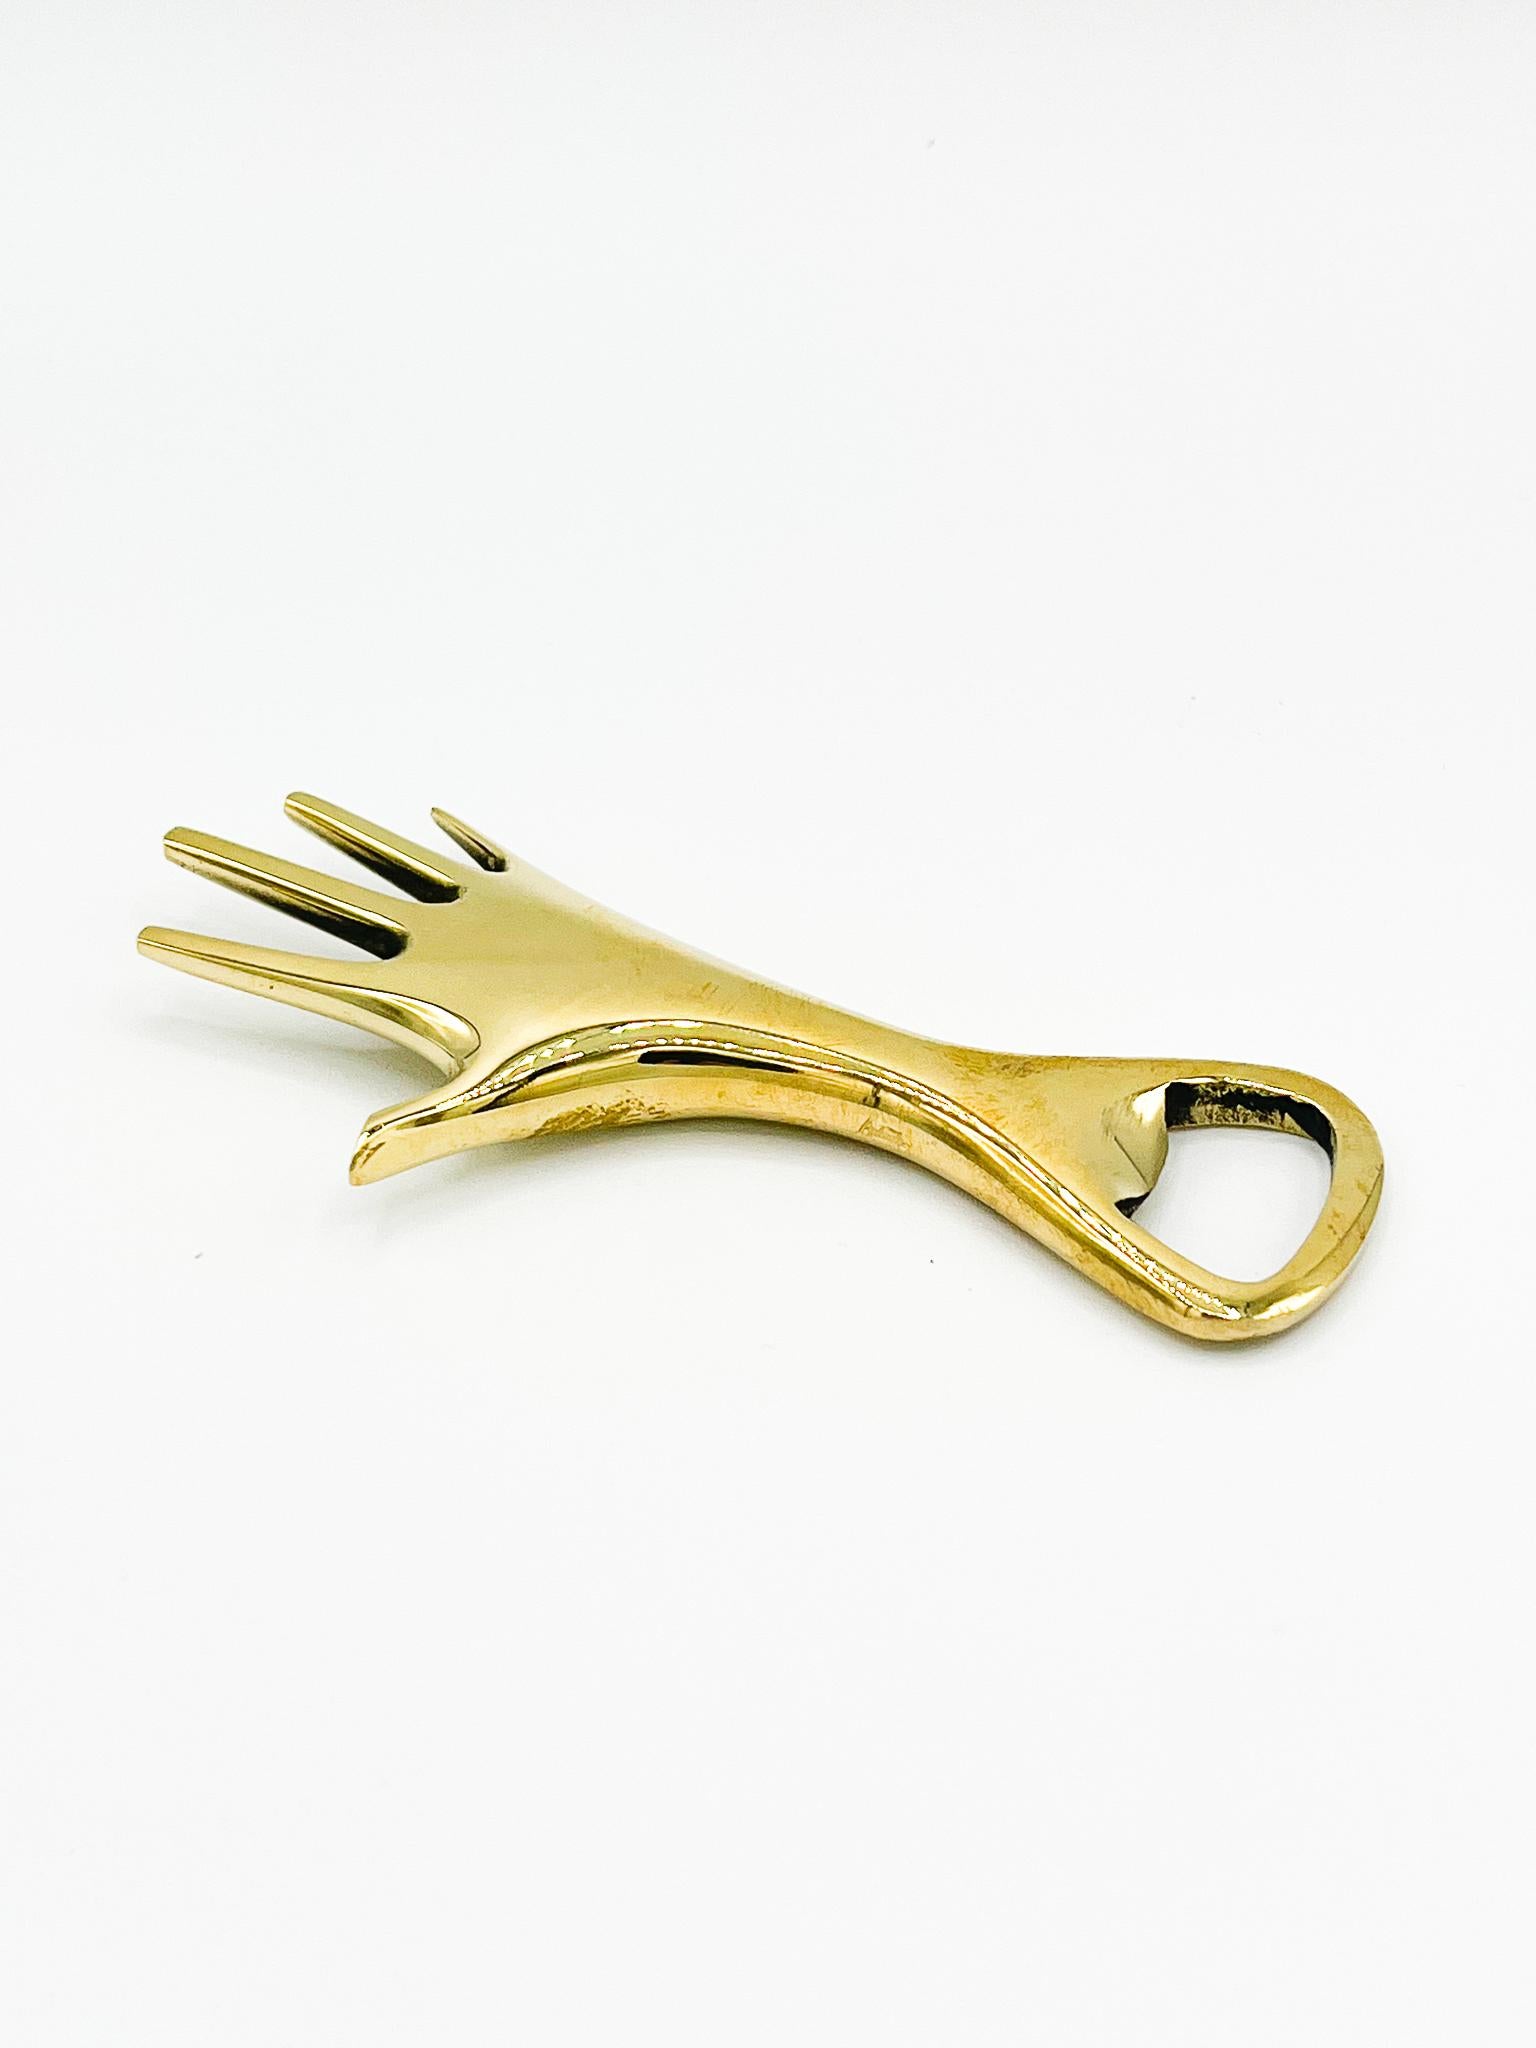 Carl Aubock Polished Brass Hand Bottle Opener #4224 In New Condition For Sale In Chalk Hill, PA